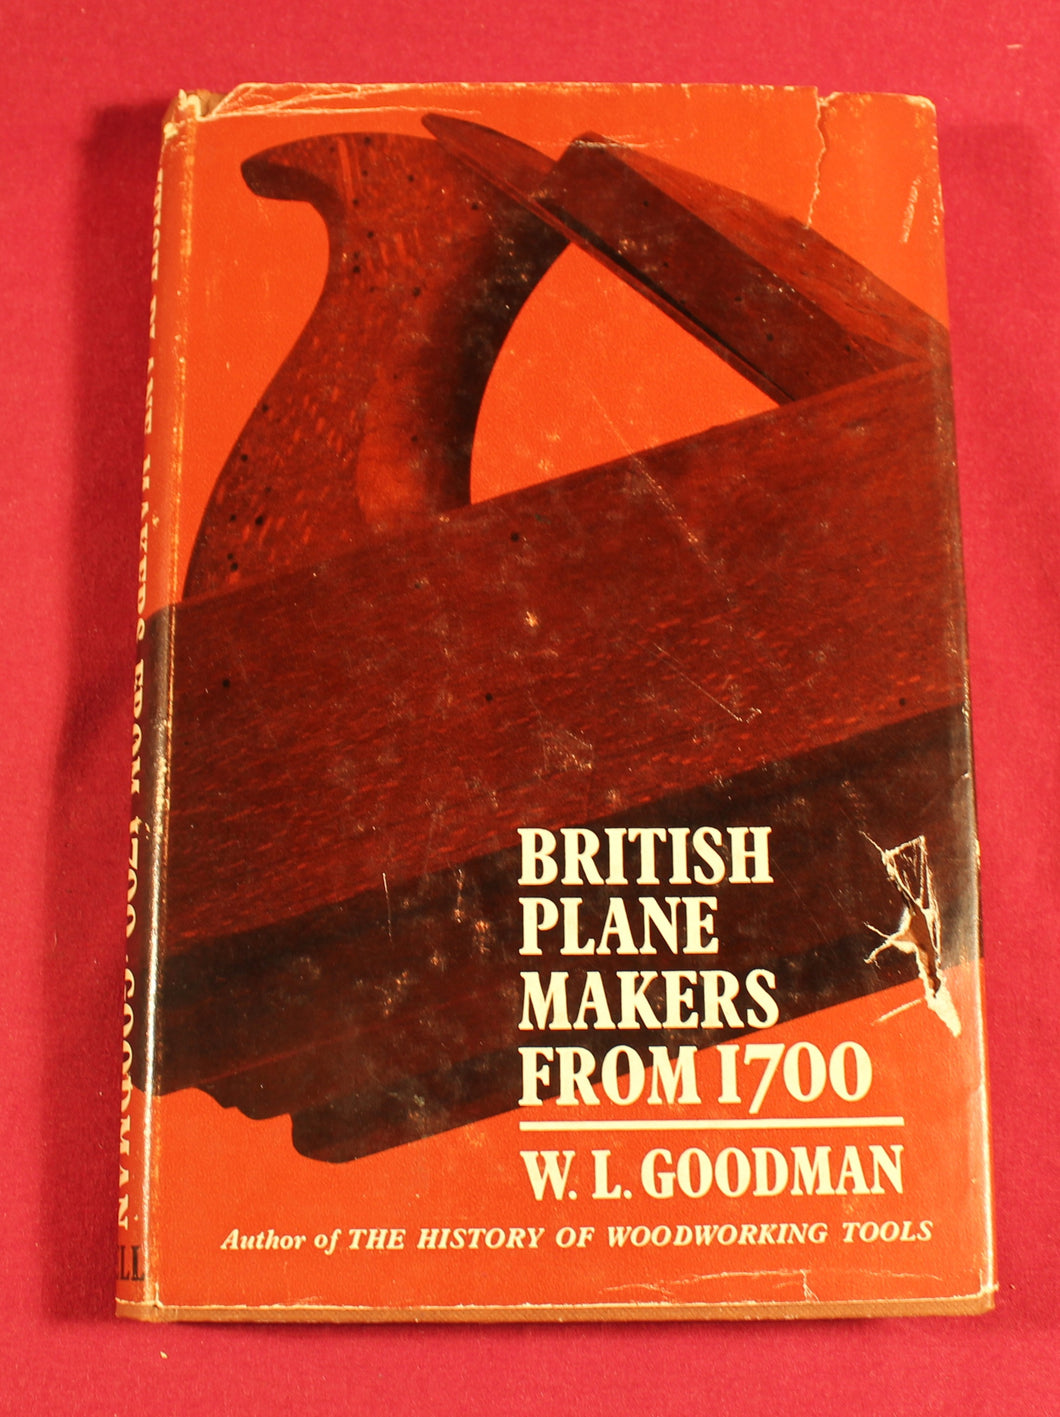 British plane makers from 1700 Hardcover – W.L.Goodman